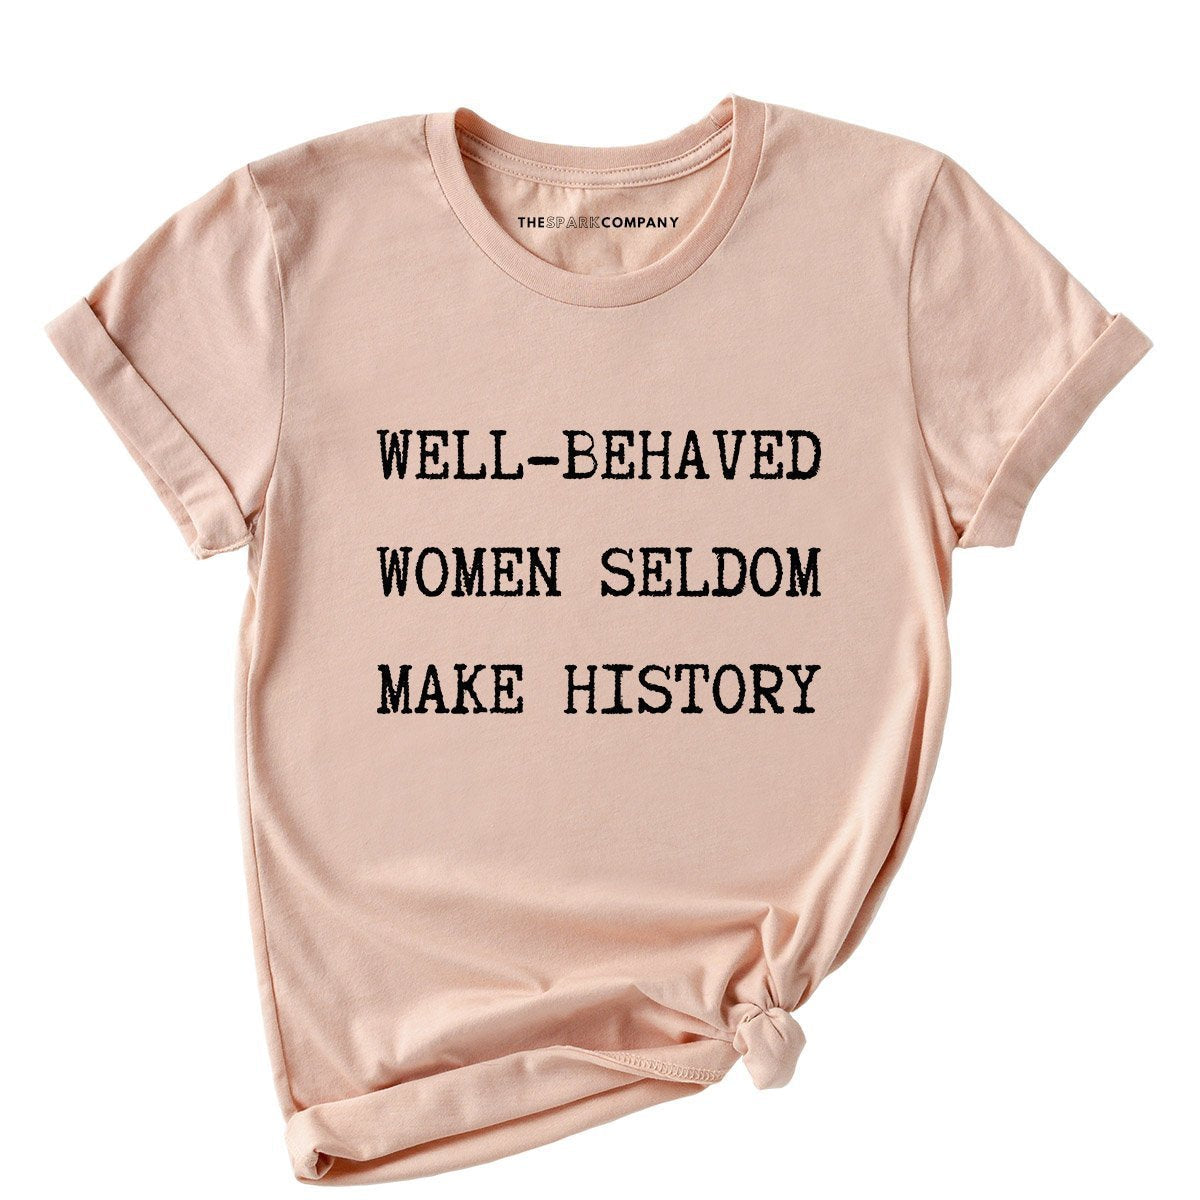 Well Behaved Women Seldom Make History T Shirt The Spark Company 3186